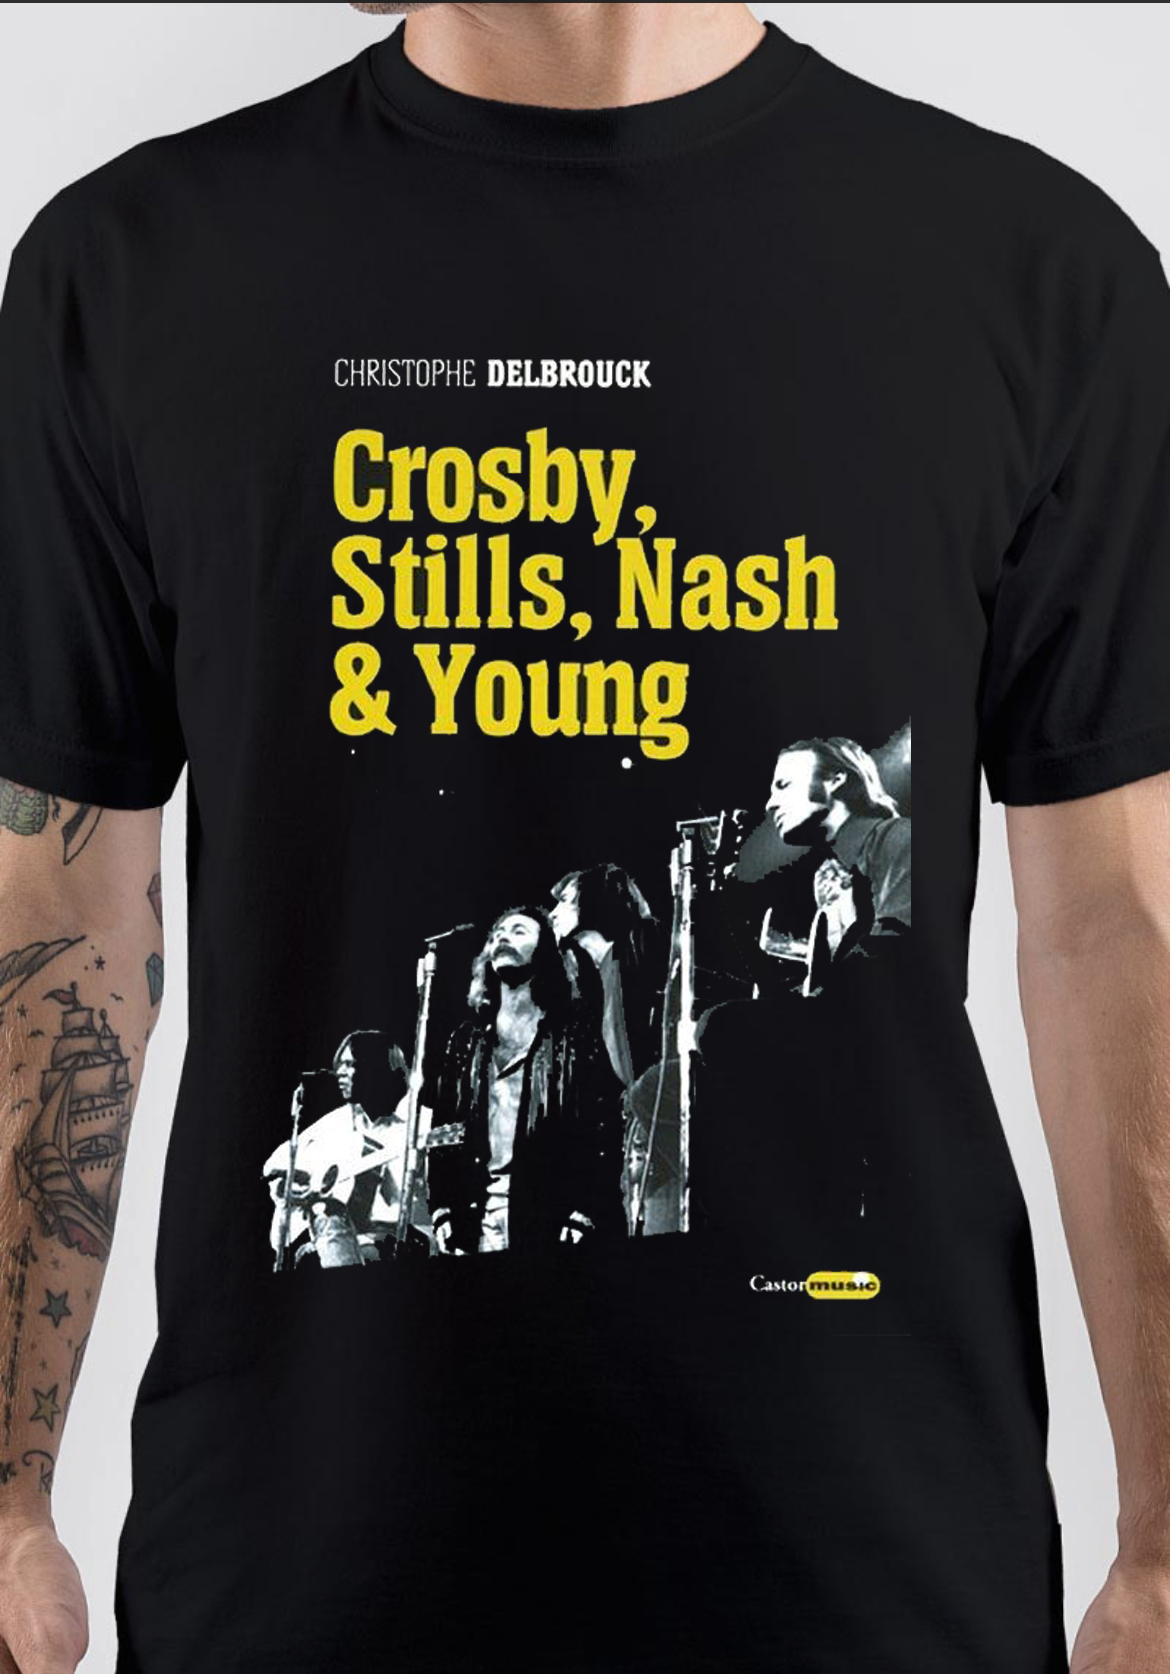 Crosby, Stills, Nash & Young T-Shirt And Merchandise